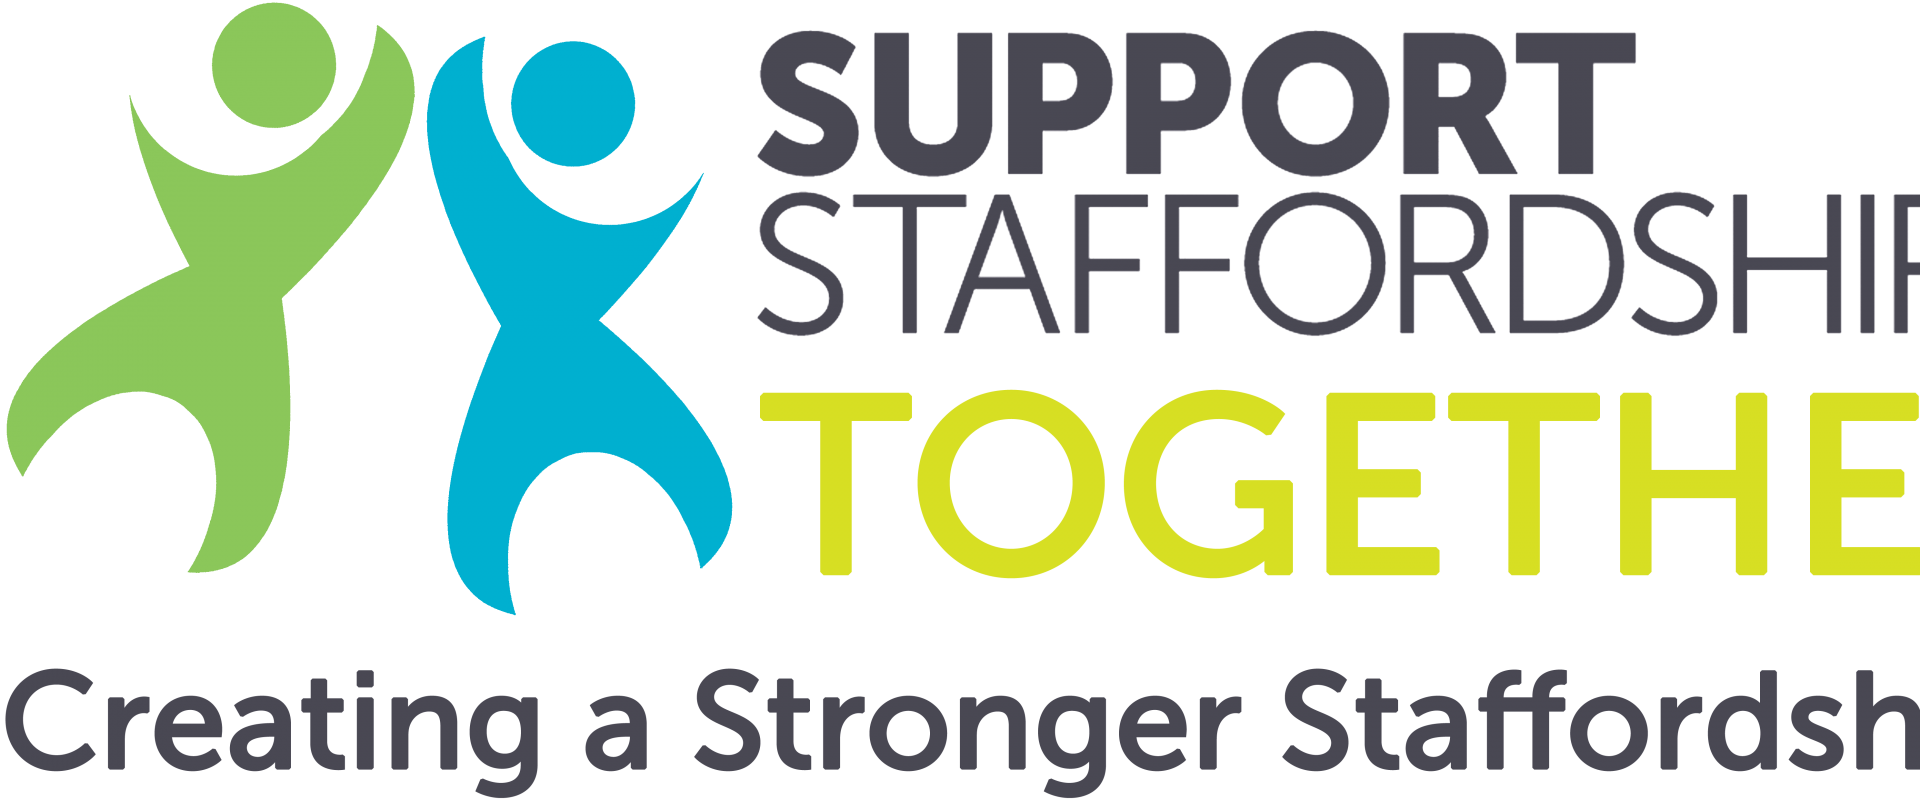 Support Staffordshire - communities and individuals